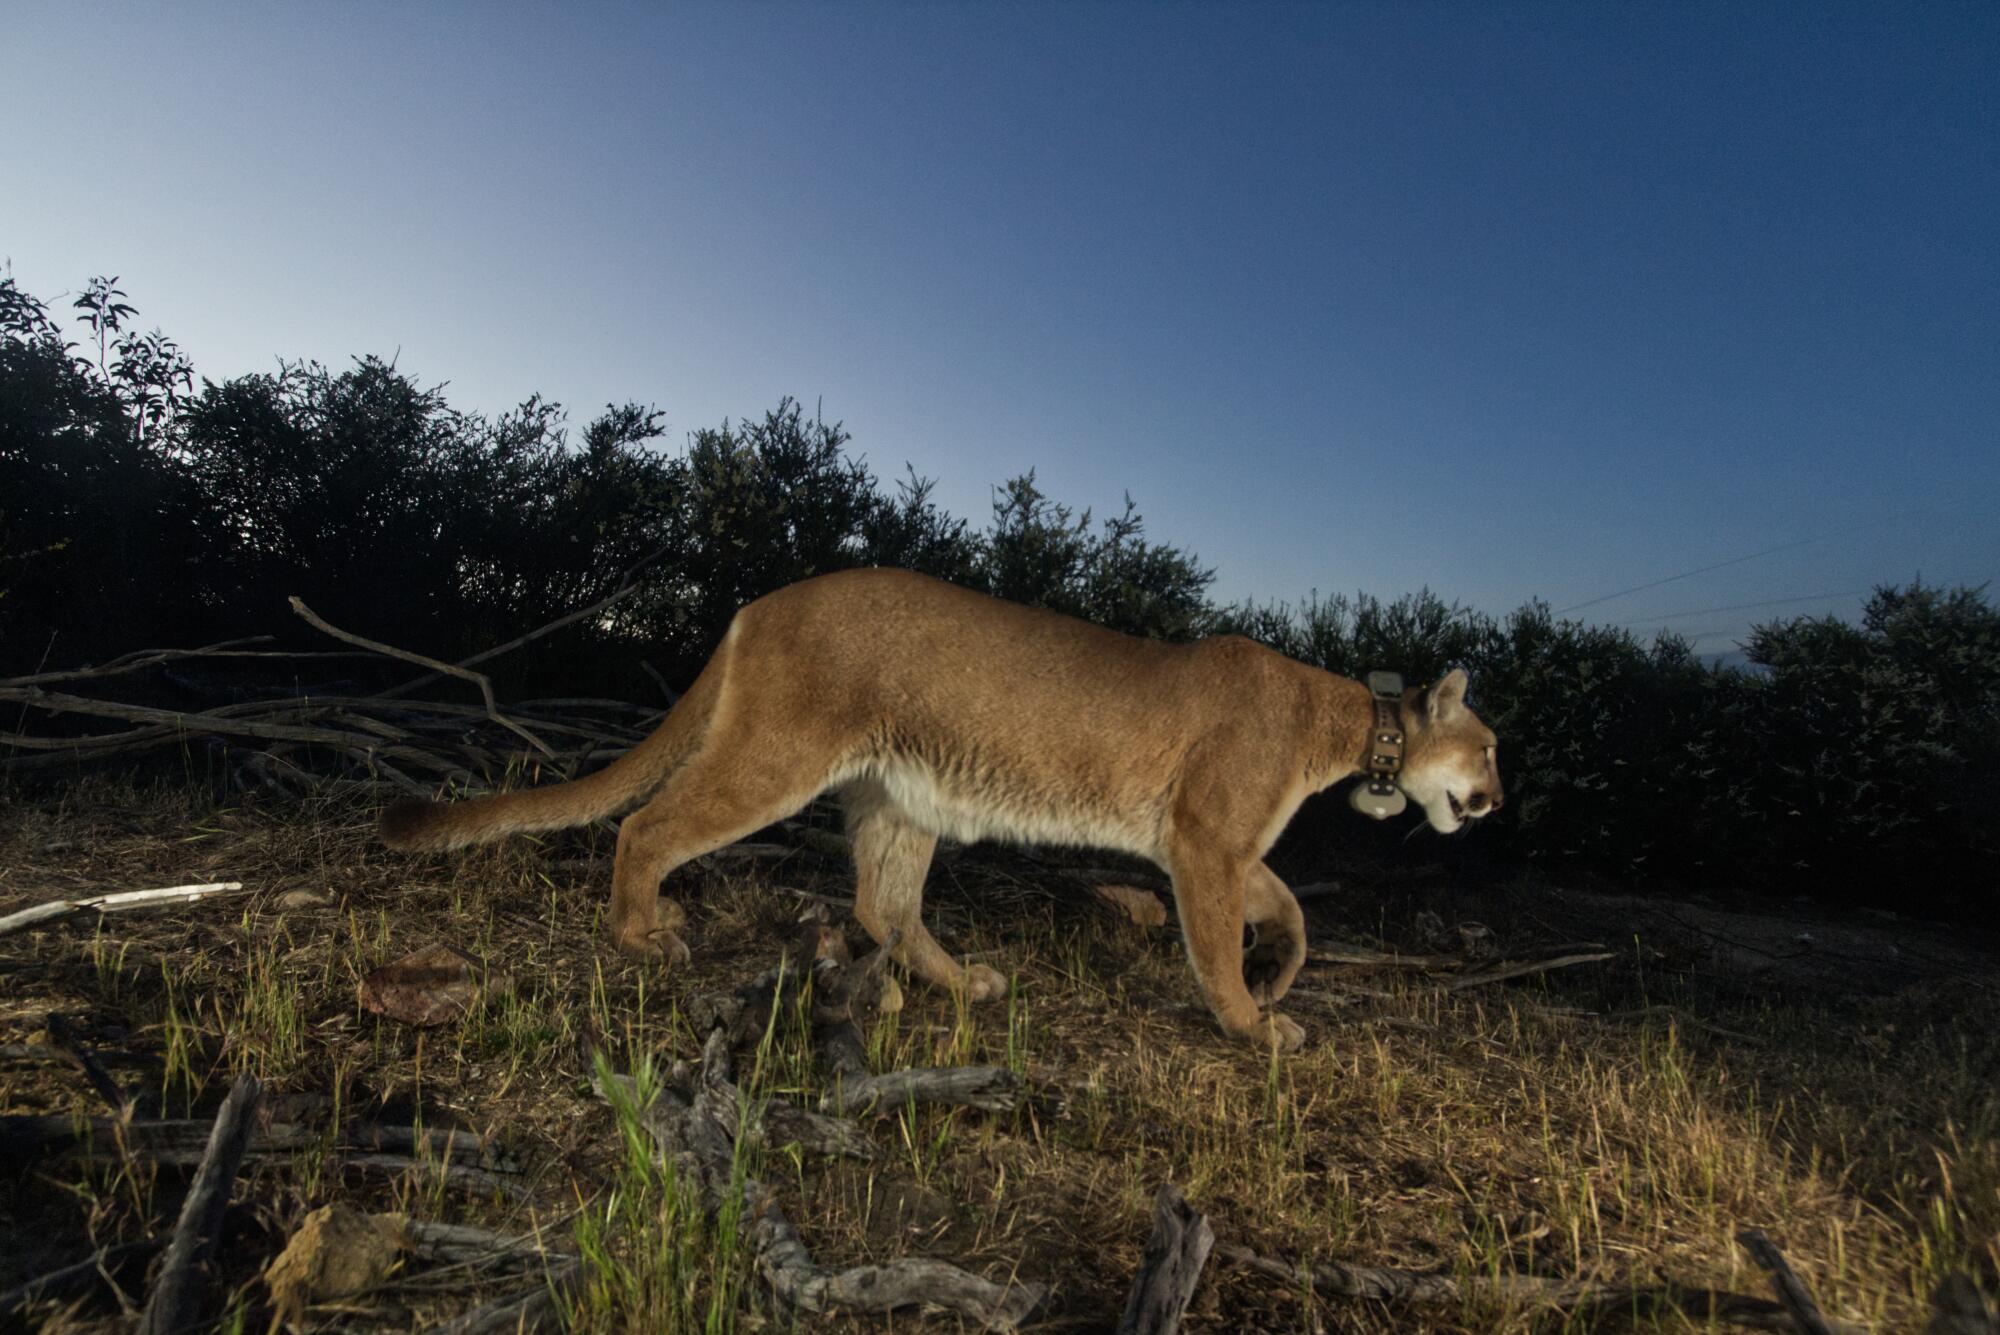 Adult female P-65 mountain lion on a grassy knoll against a background of trees at sunset